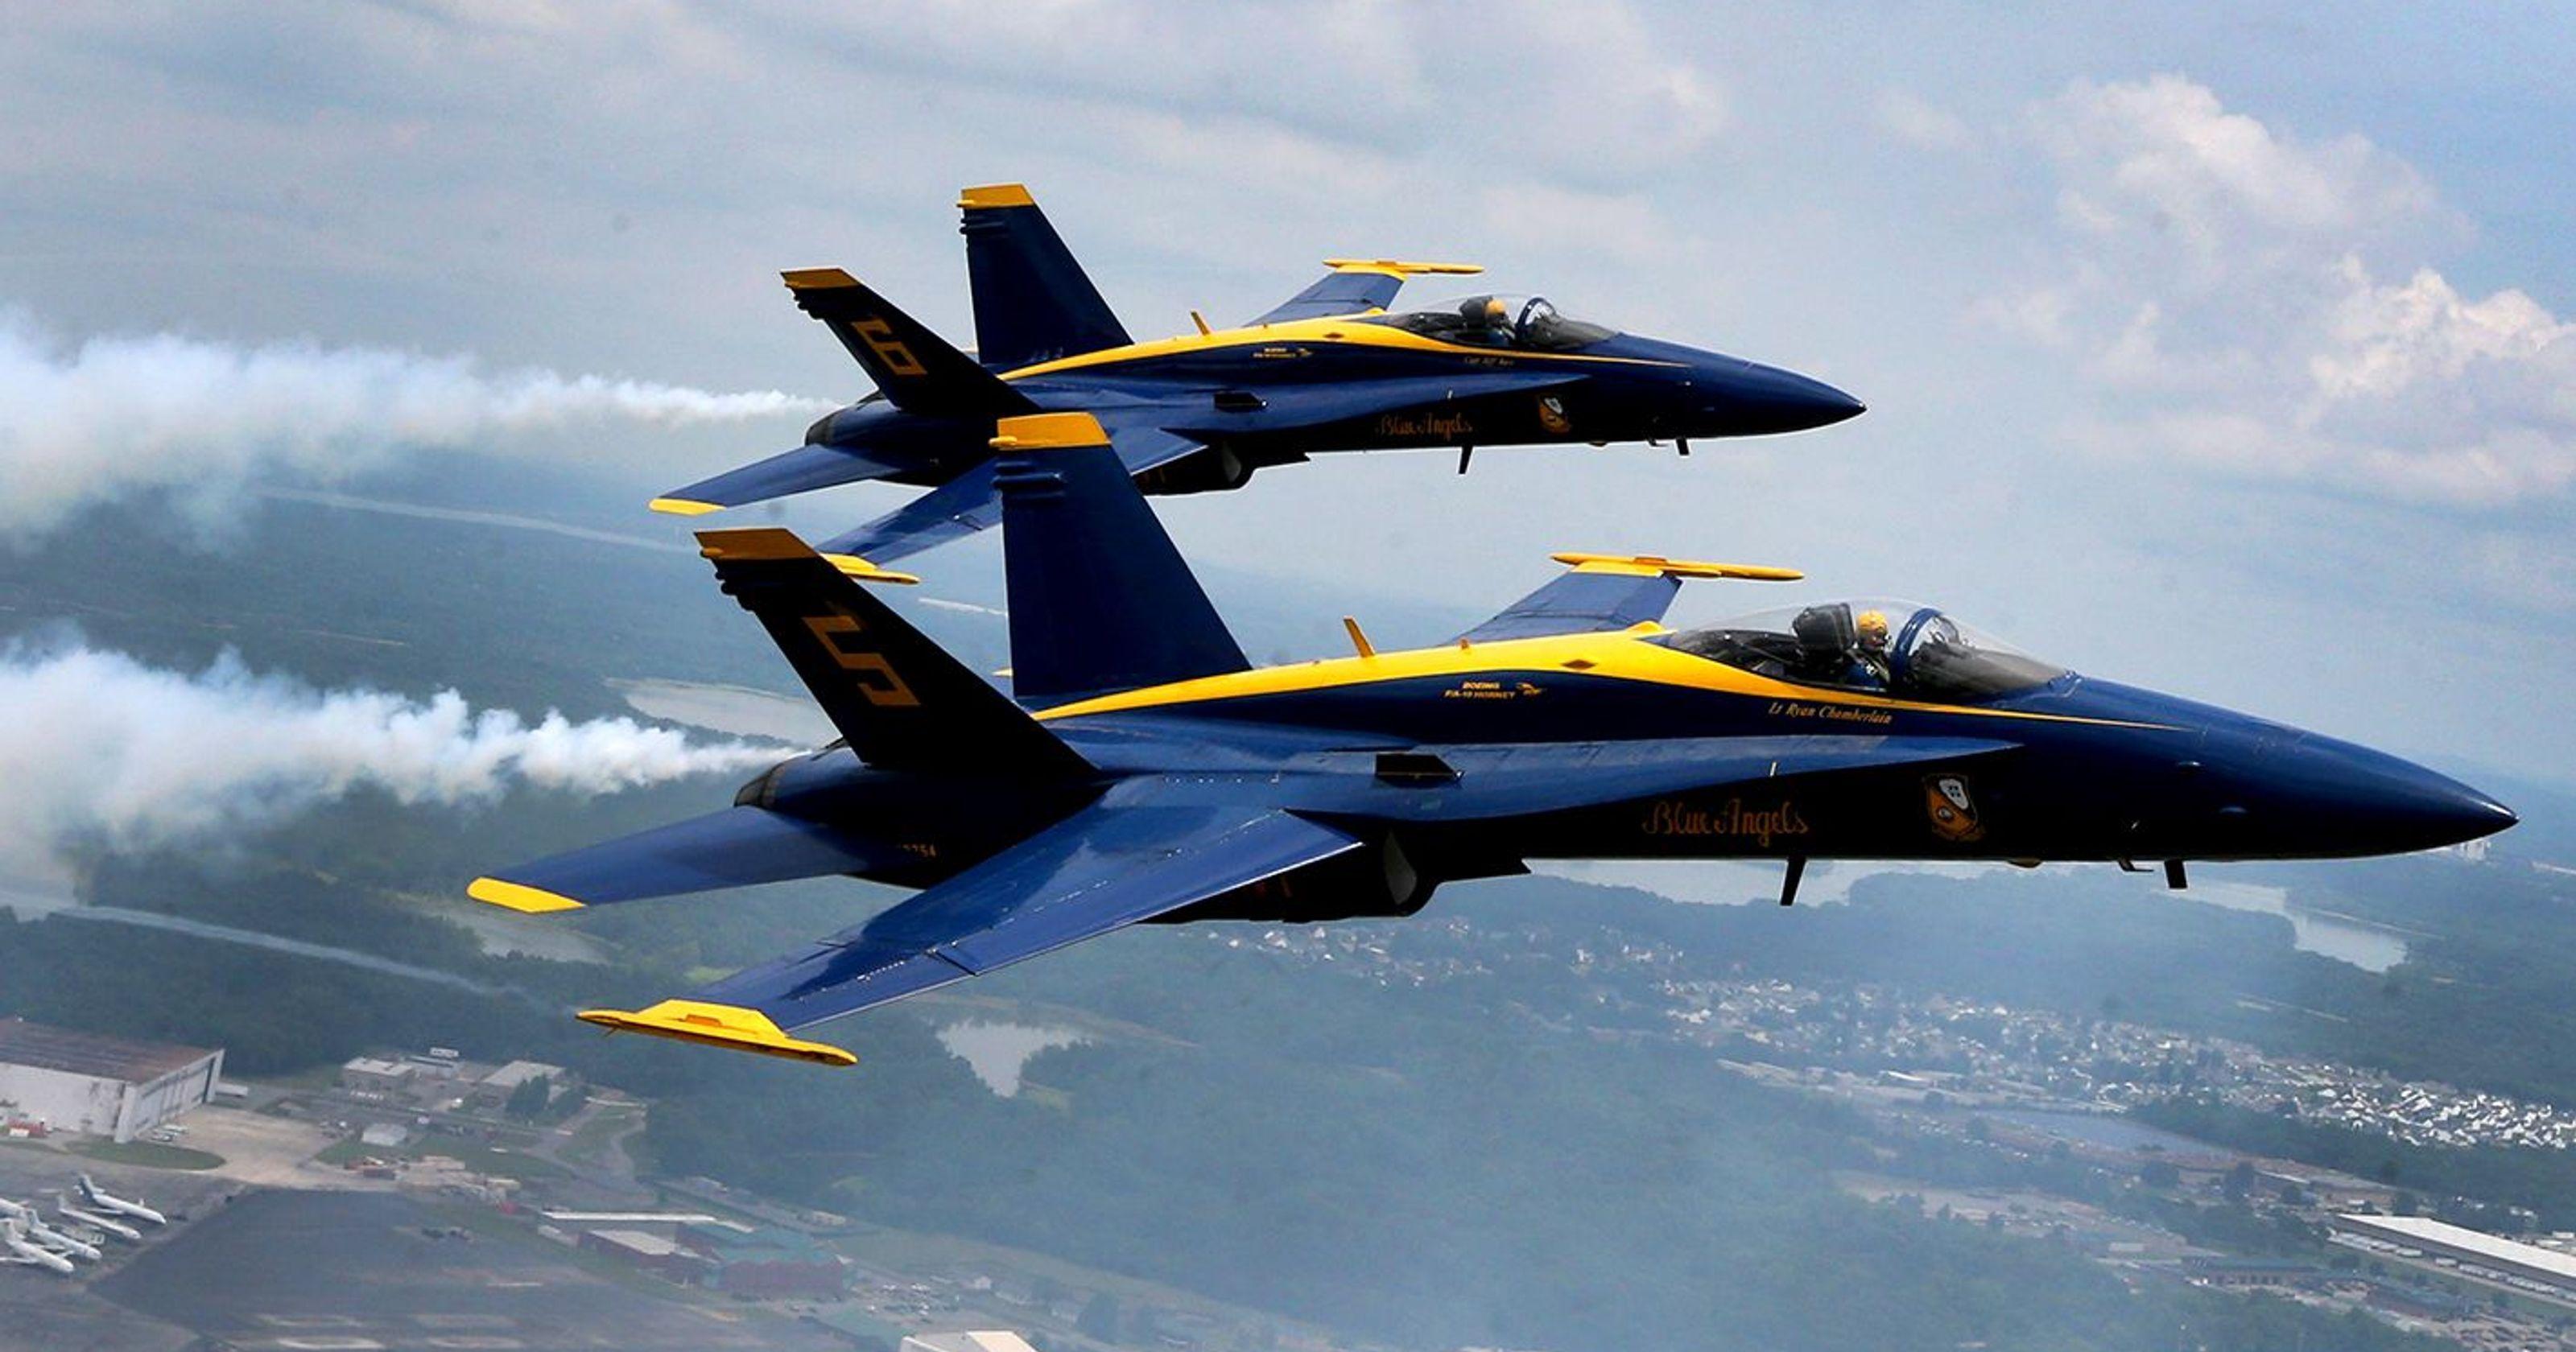 Blue Angels 2018 Logo - Blue Angels schedule: A look at the 2018 schedule, return to Smyrna